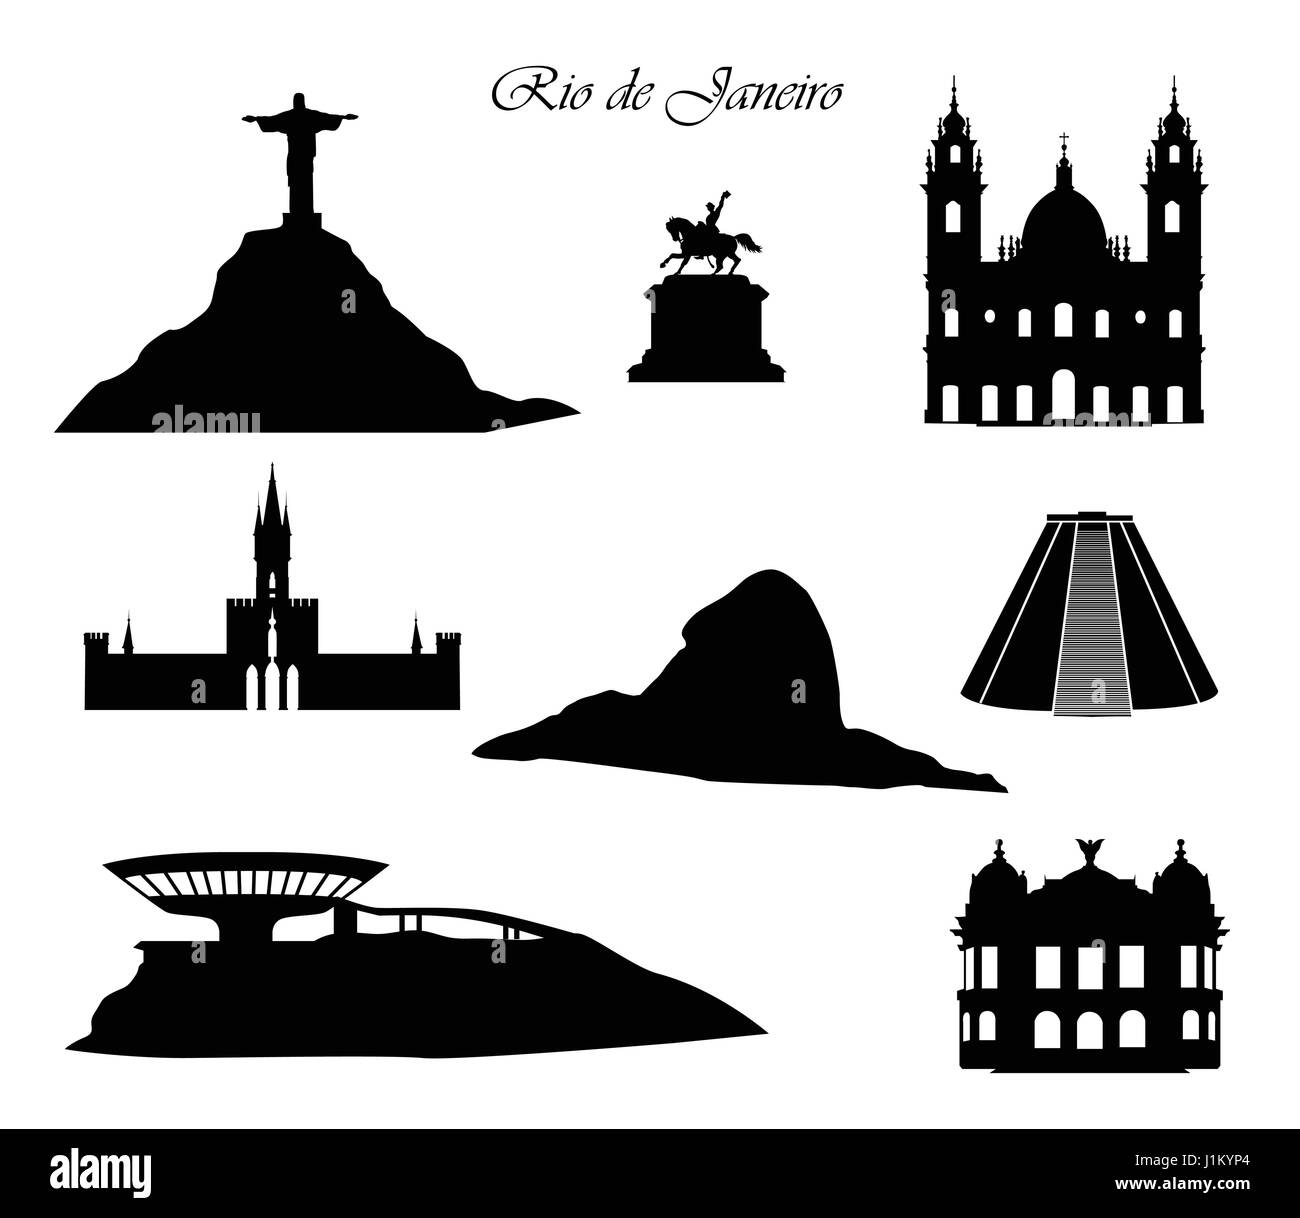 Rio de Janeiro city signs. Landmarks set. Cityscape silhouette with buildings and mountains. Stock Vector